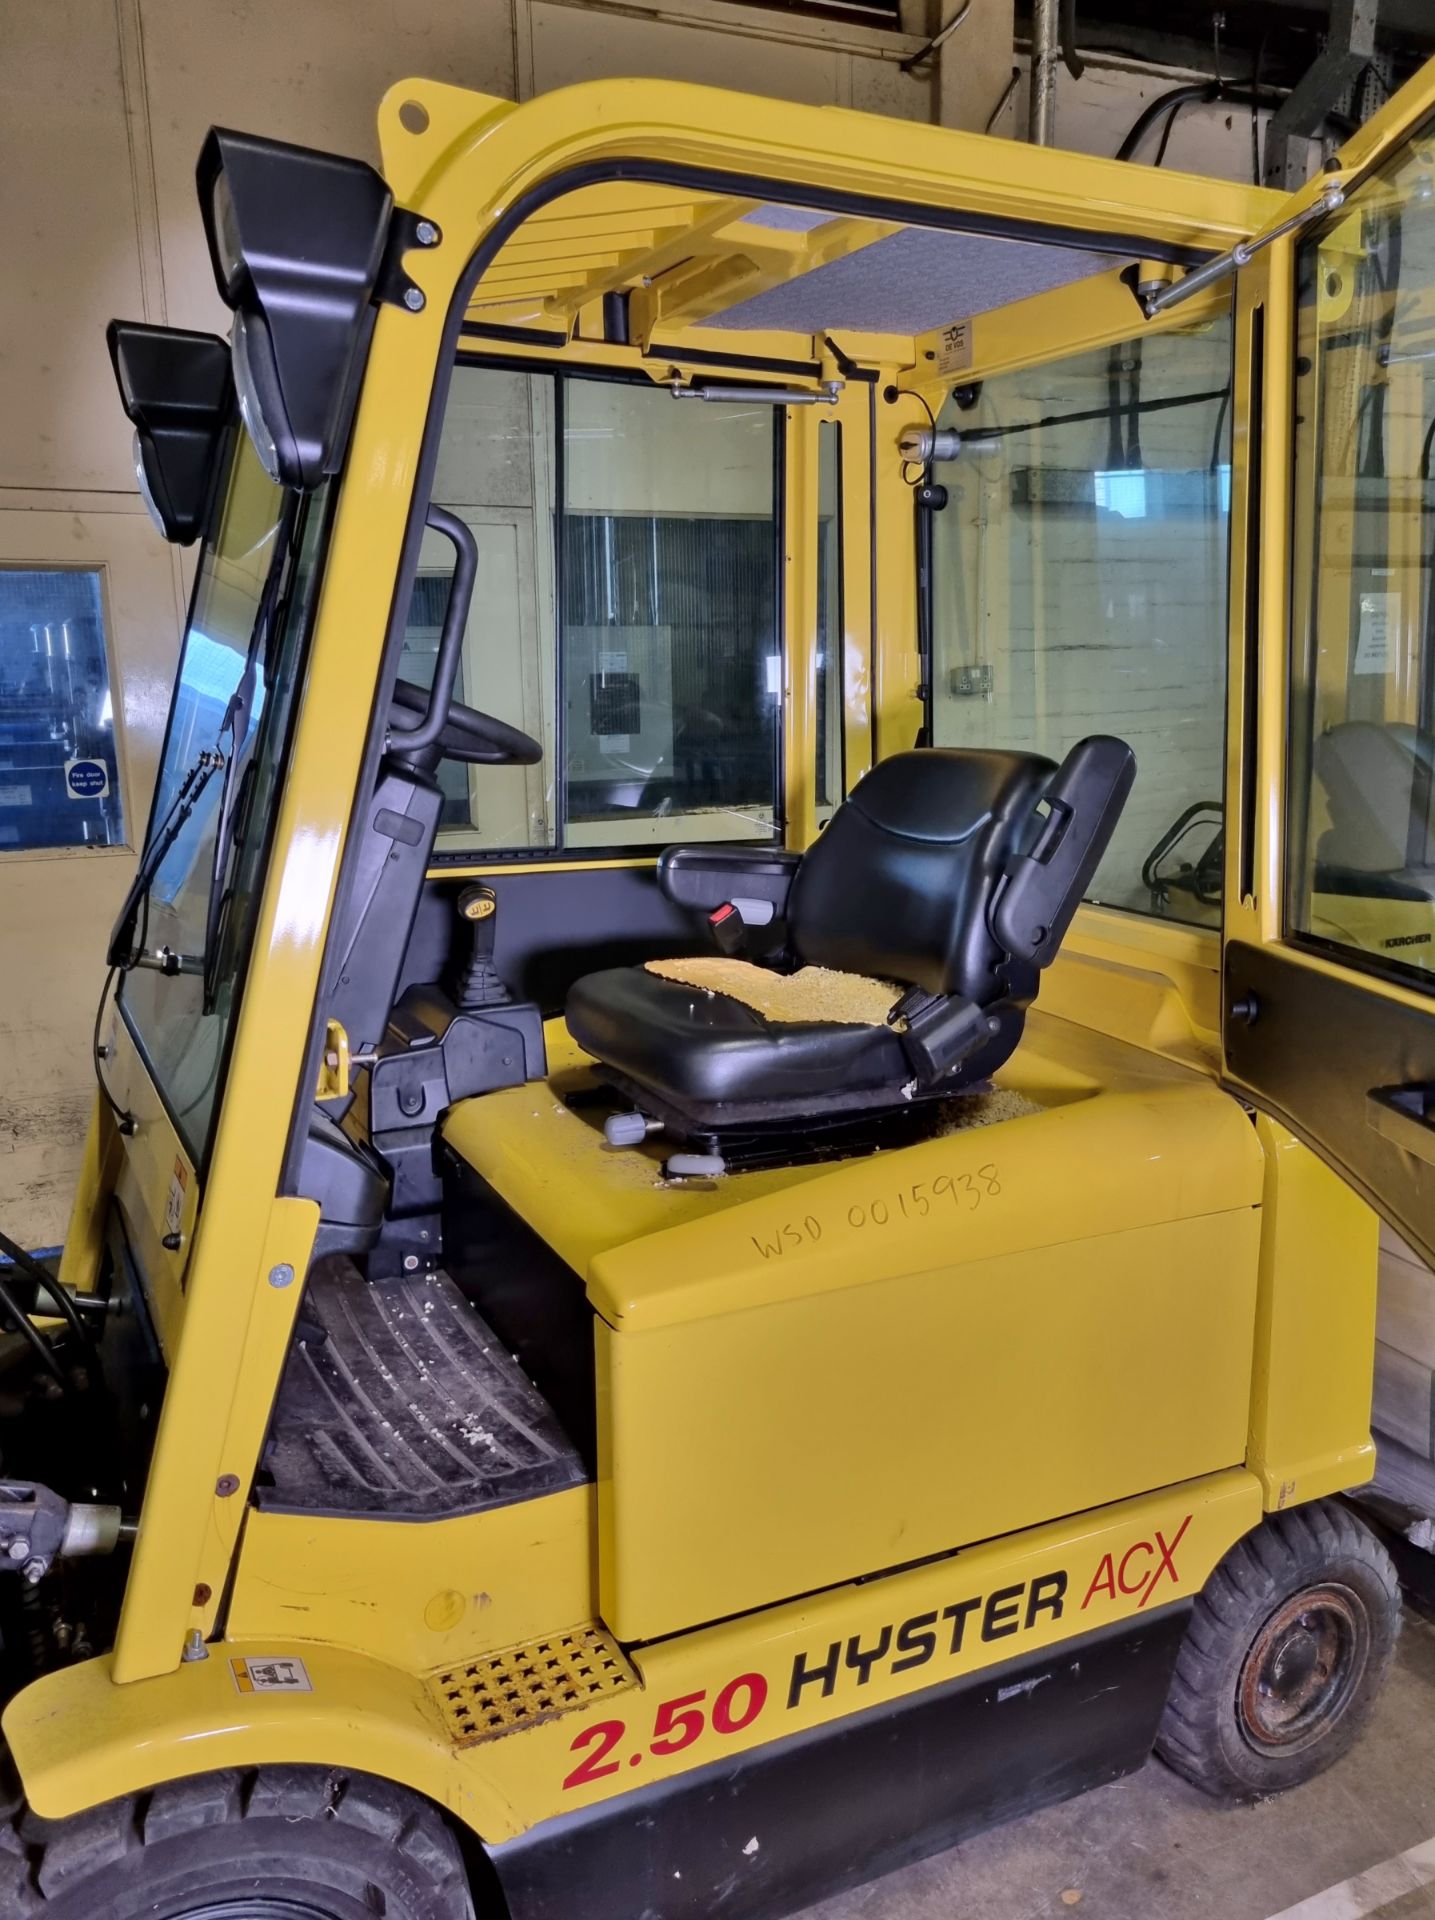 Hyster ACX J2.50XM-717 4-wheel electric forklift truck - year of manufacture 2008 - Image 6 of 21